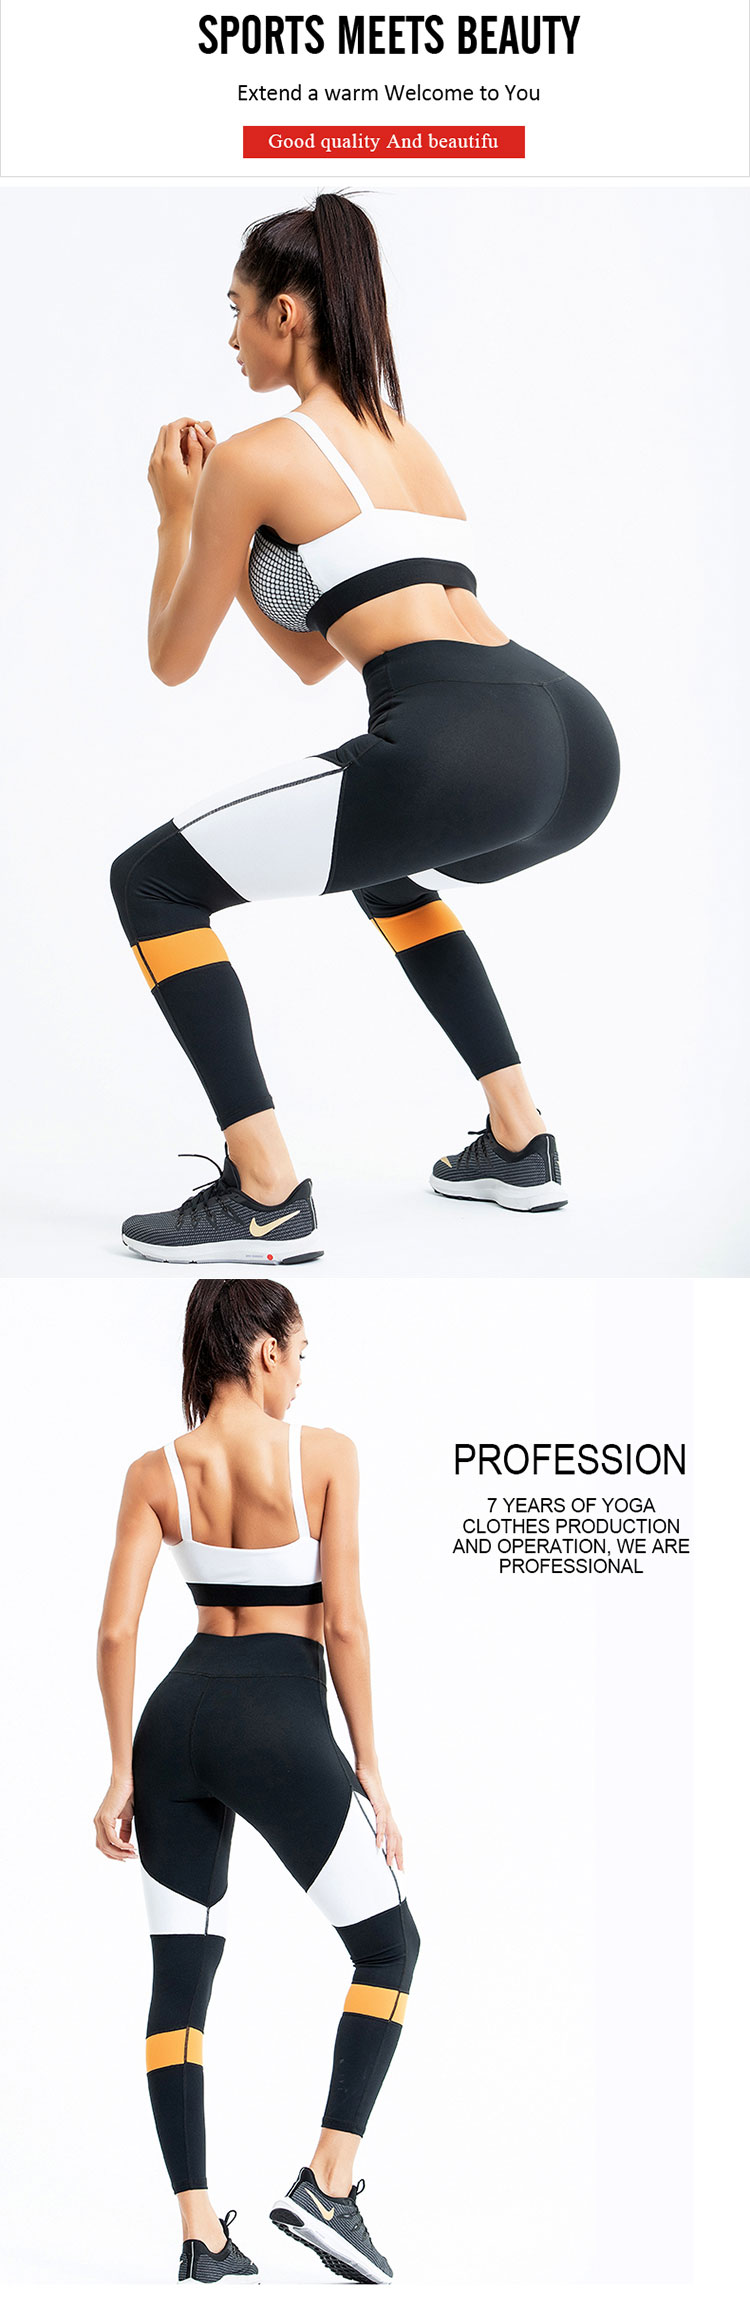 Mesh-athletic-leggings-is-just-like-the-second-skin-of-the-human-body